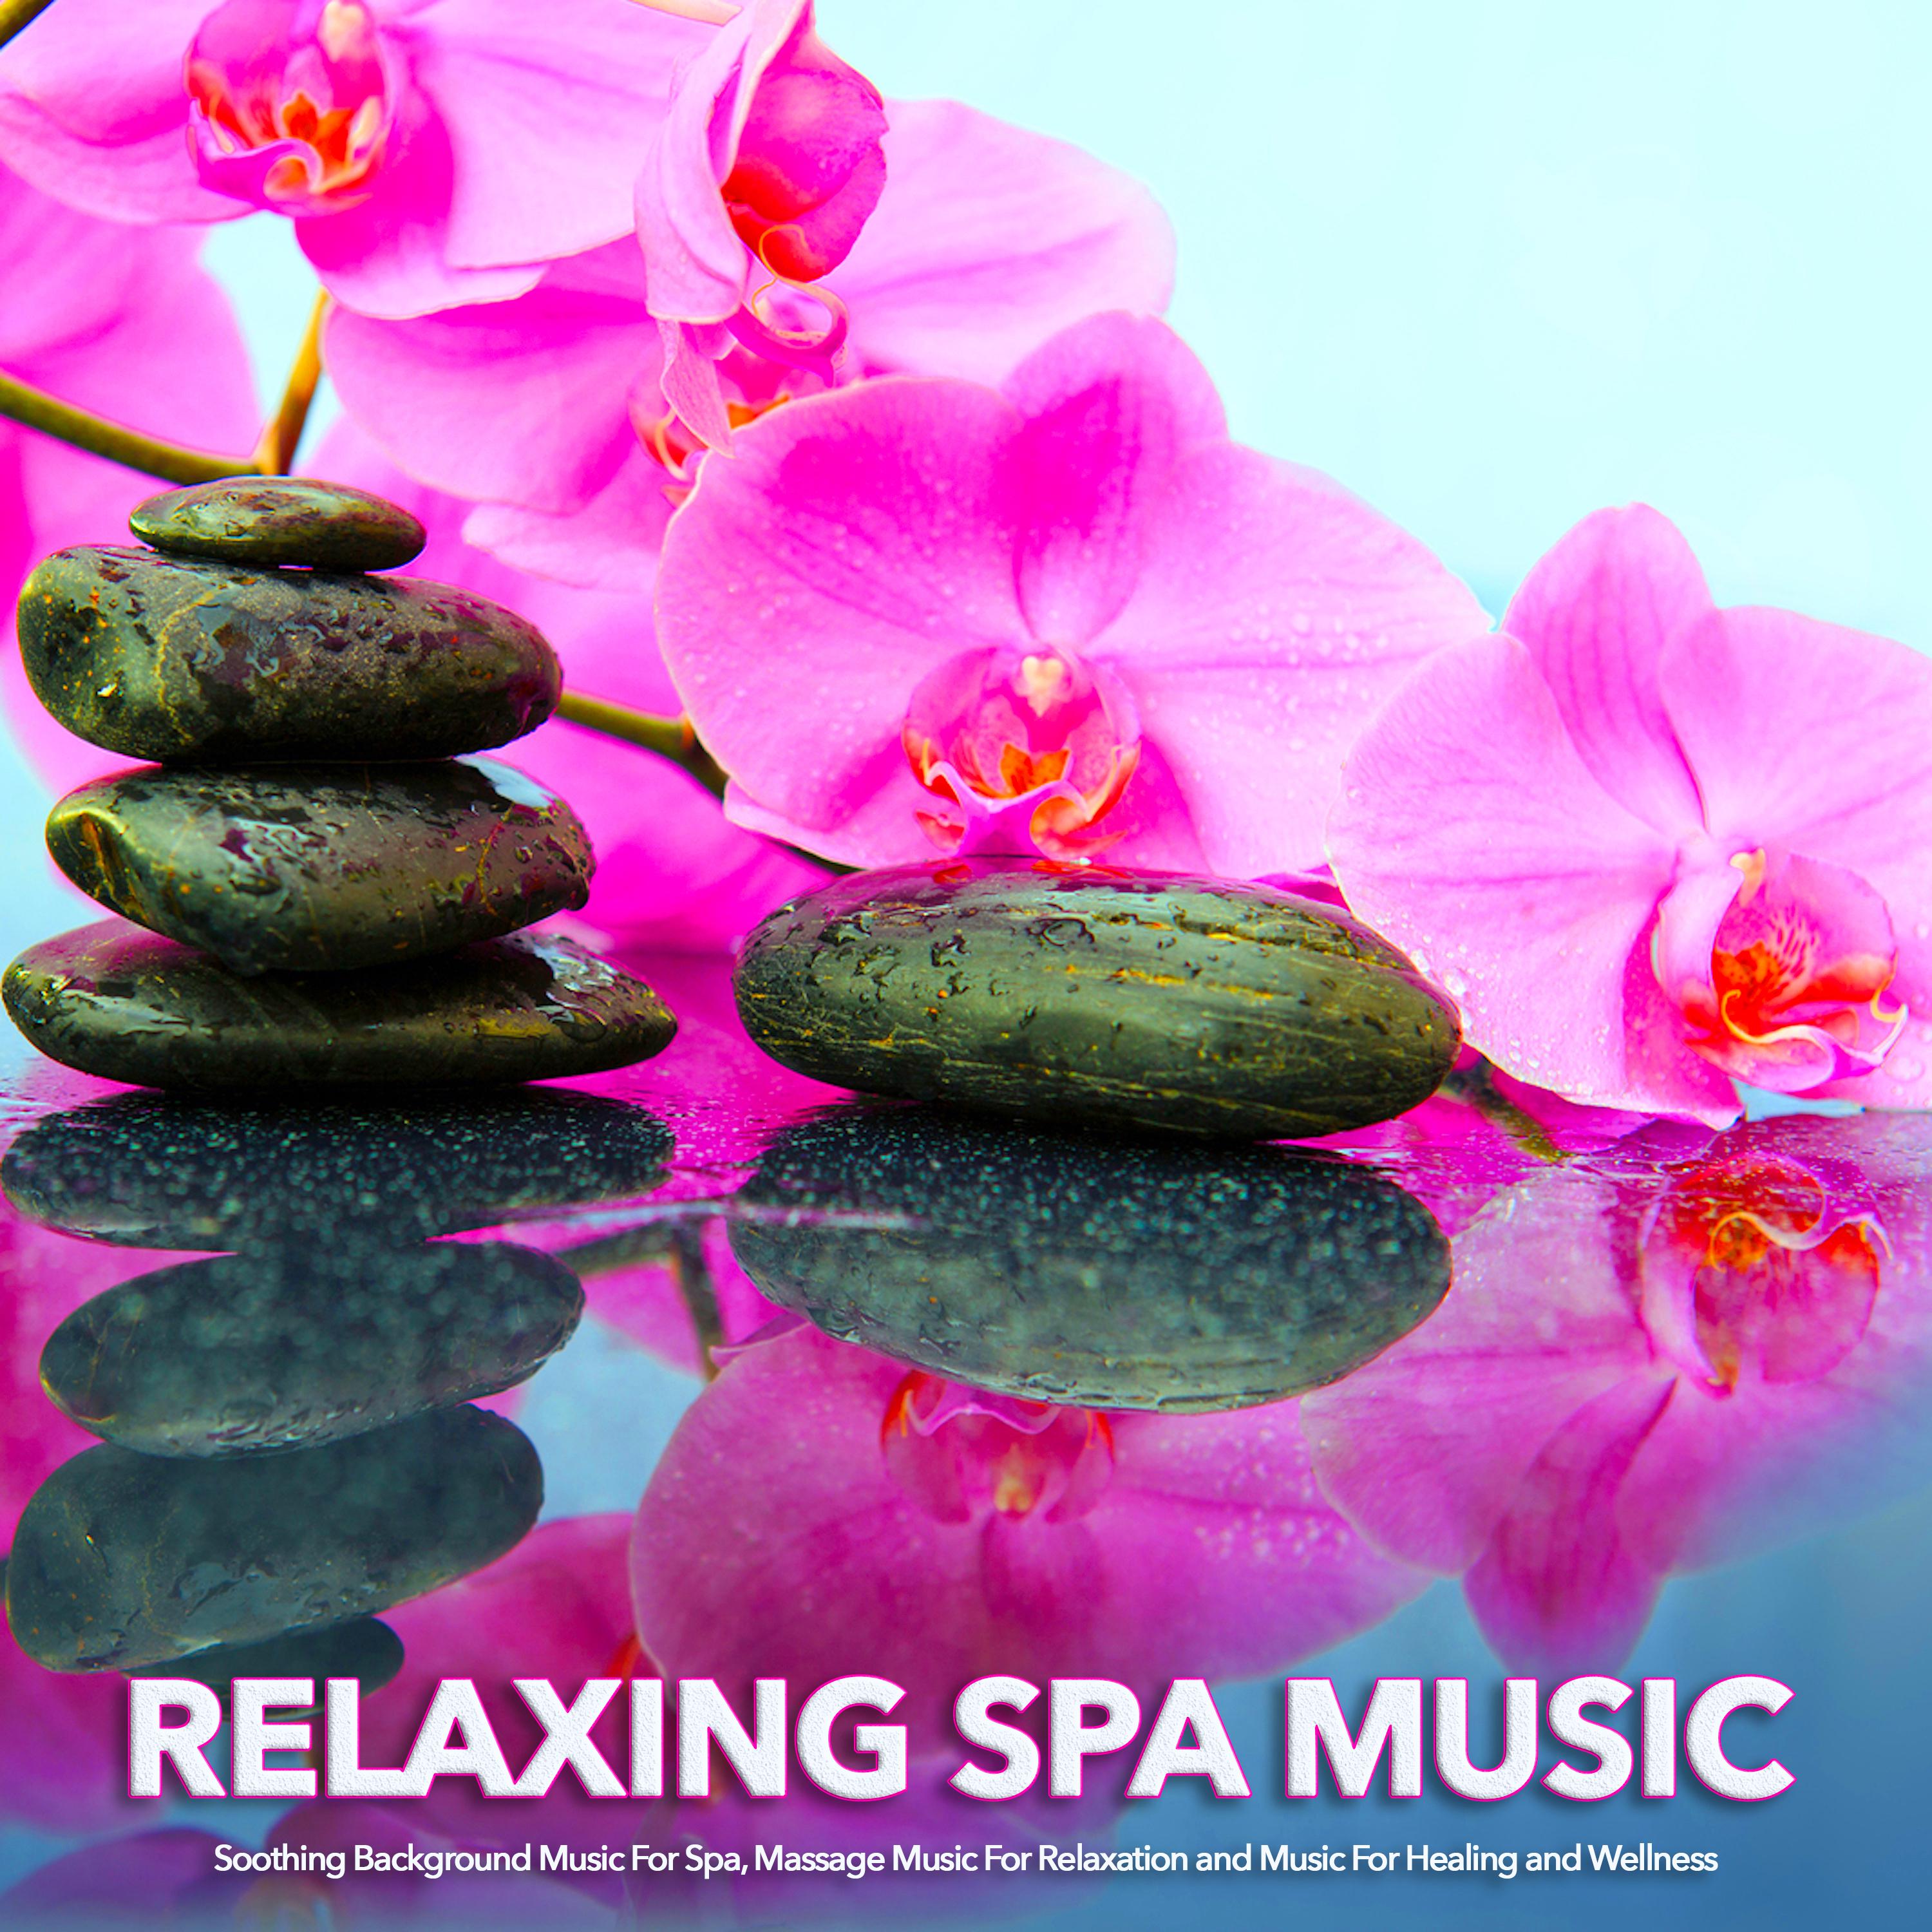 Relaxing Spa Music: Soothing Background Music For Spa, Massage Music For Relaxation and Music For Healing and Wellness